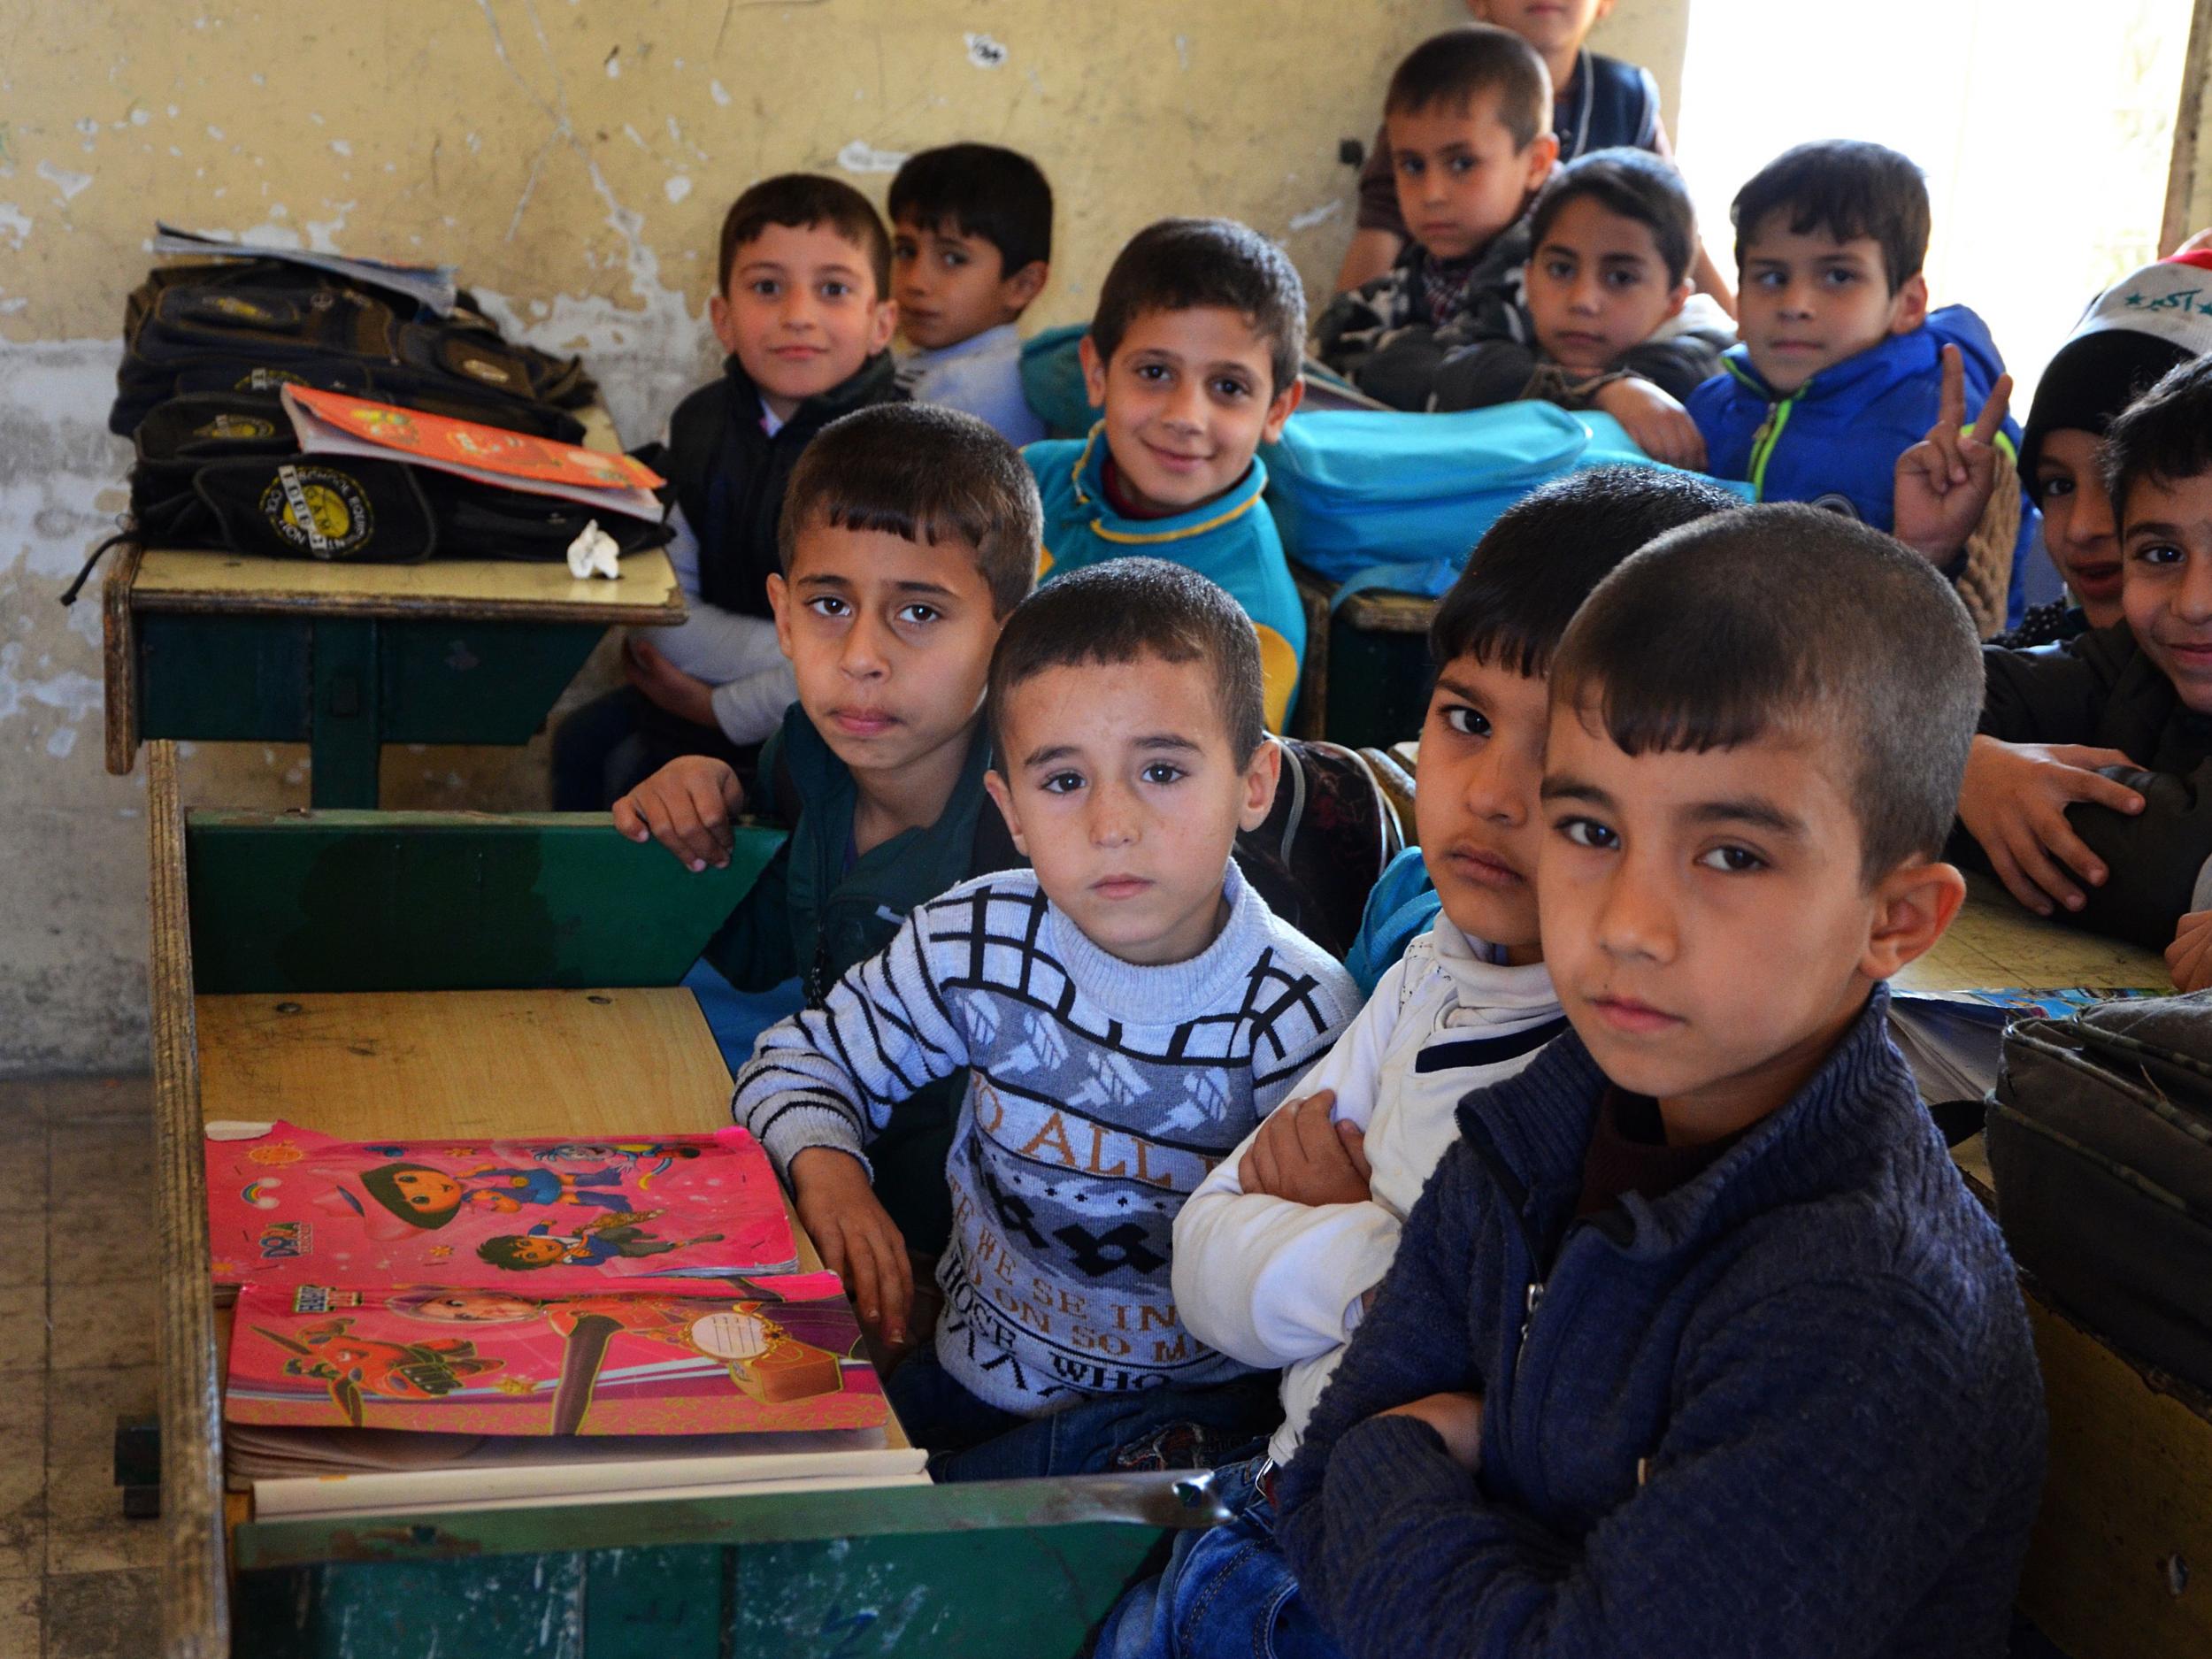 Unicef has supported local authorities to rehabilitate 576 schools within the war-torn country